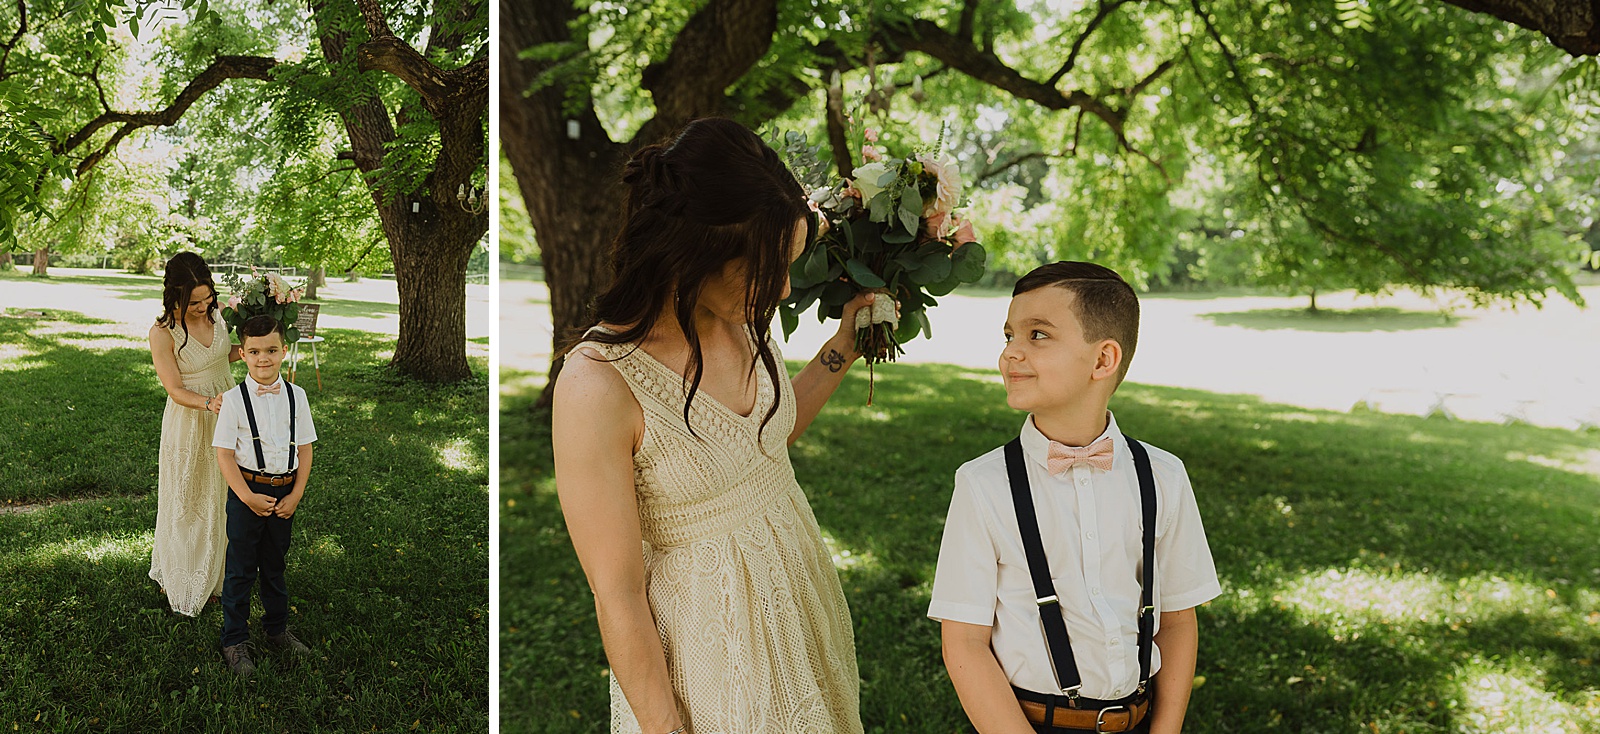 Boho Kansas City Wedding at The Wedding Place KC captured by Caitlyn Cloud Photography